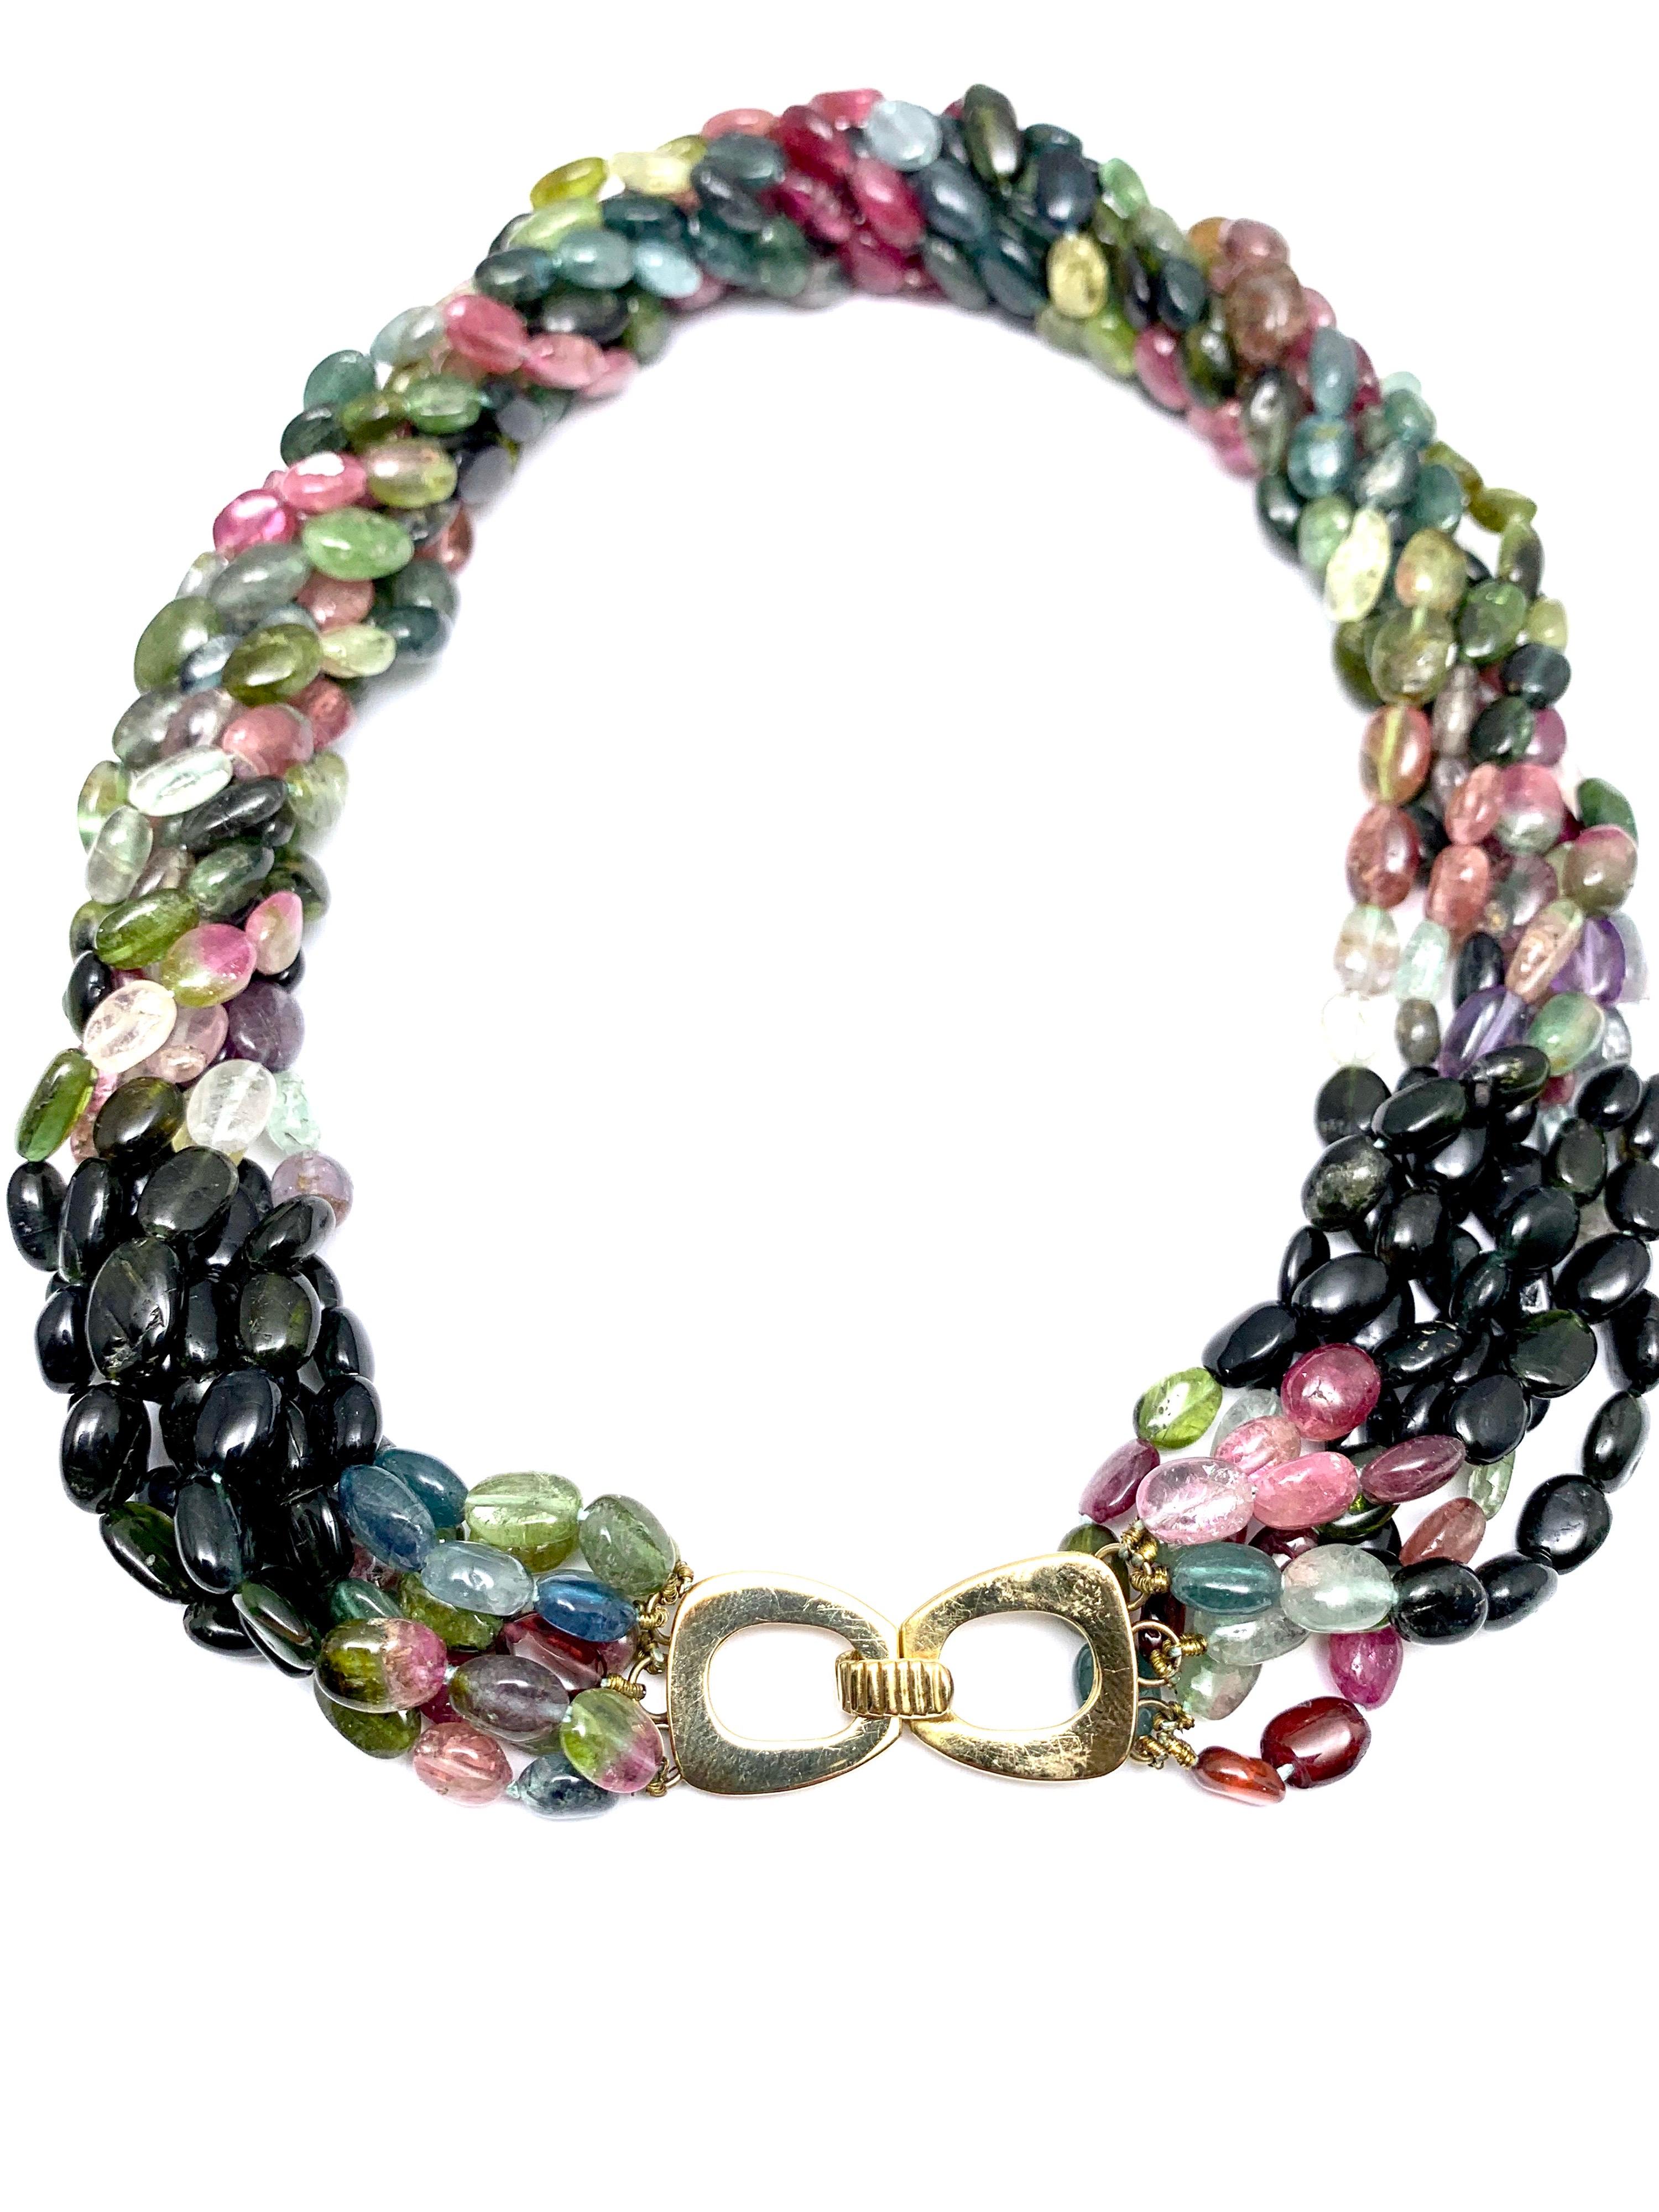 A wonderful multi strand necklace made of a variety of different colored Tourmaline.  The Tourmaline are all smooth oval shaped beads strung on eight strands.  the clasp is a simple slide open and close in 14k yellow gold.  The necklace is 18.50